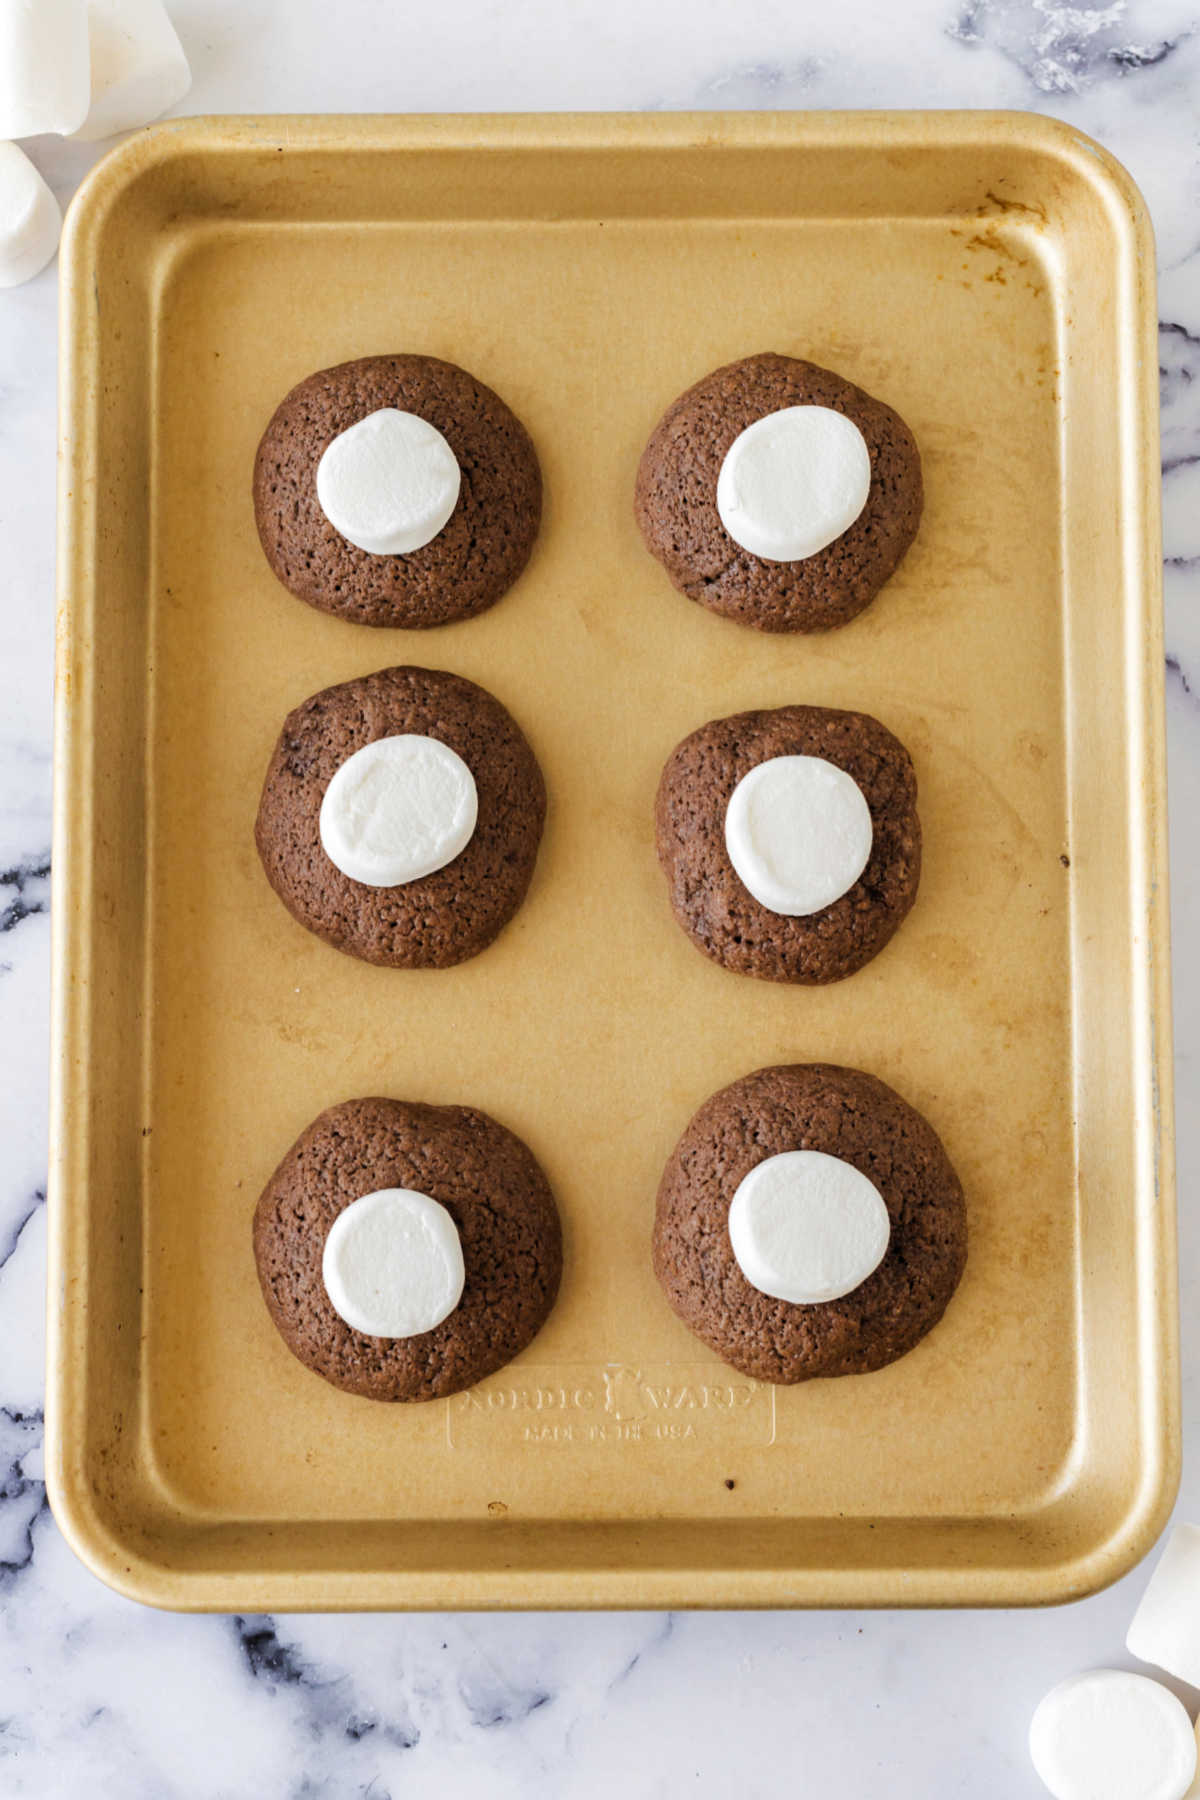 Putting marshmallow halves on partially baked chocolate cookie dough.